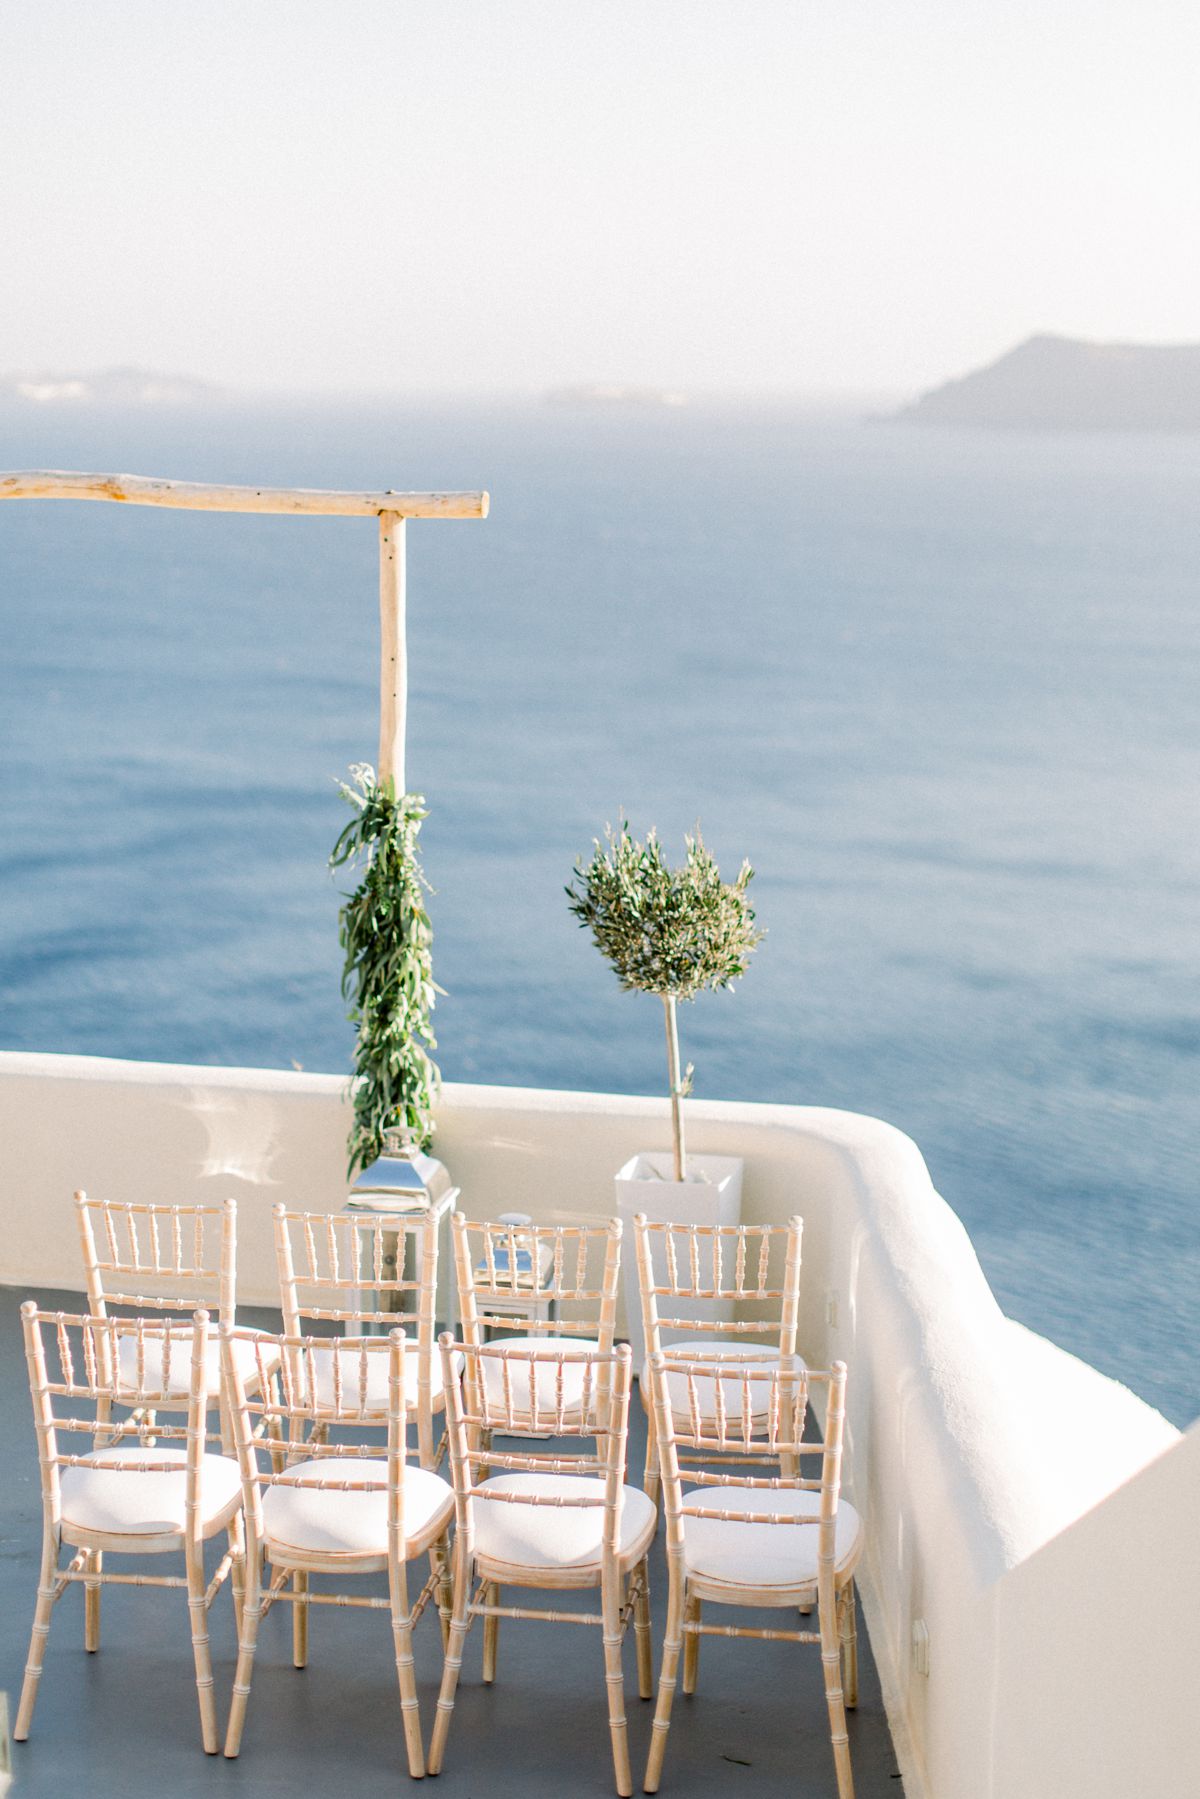 Set up for elopement at Canaves Oia, Santorini